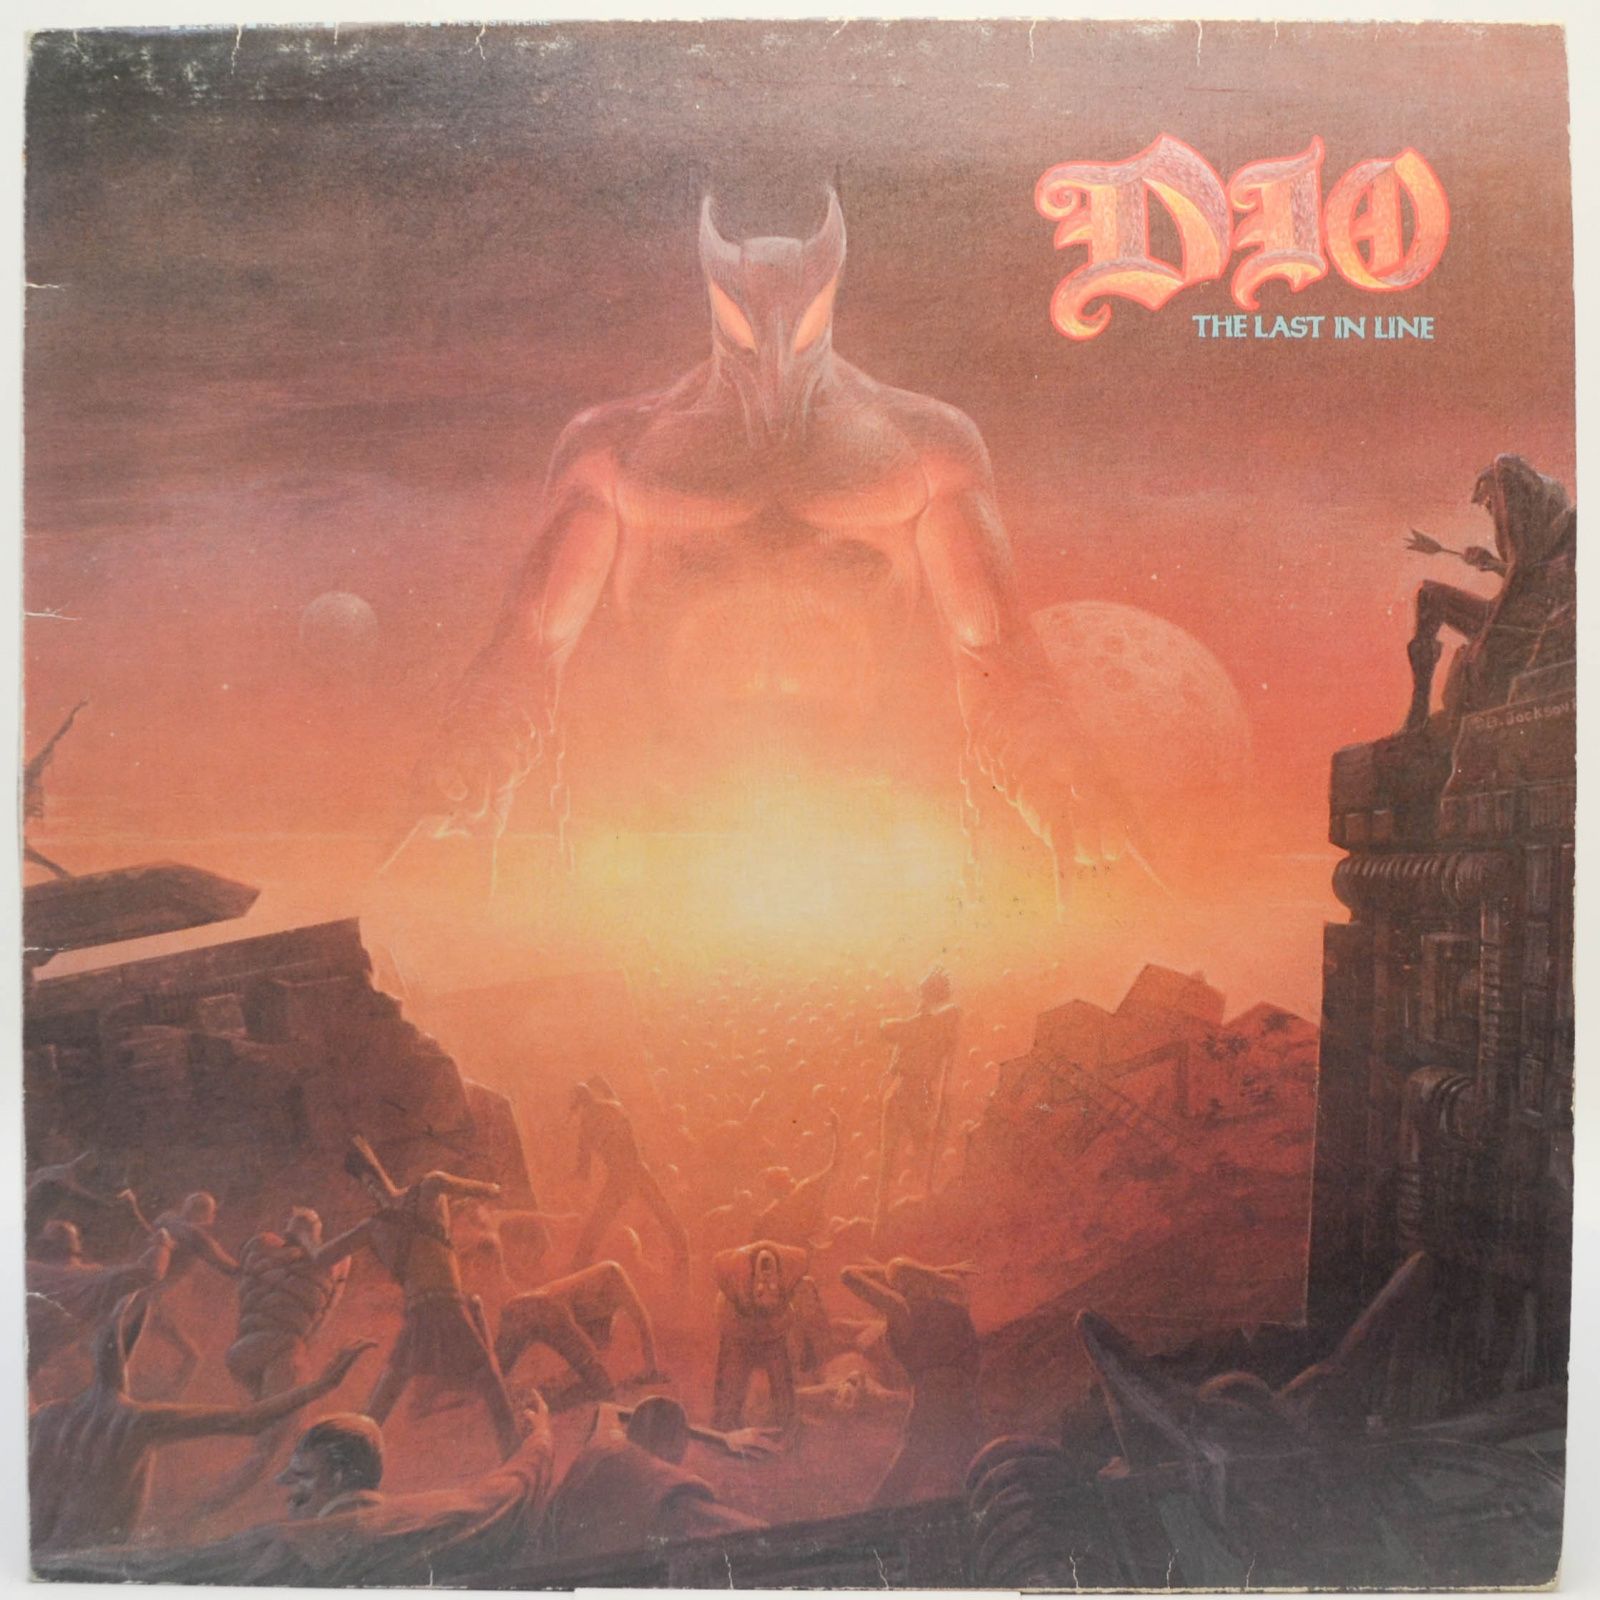 Dio — The Last In Line, 1984